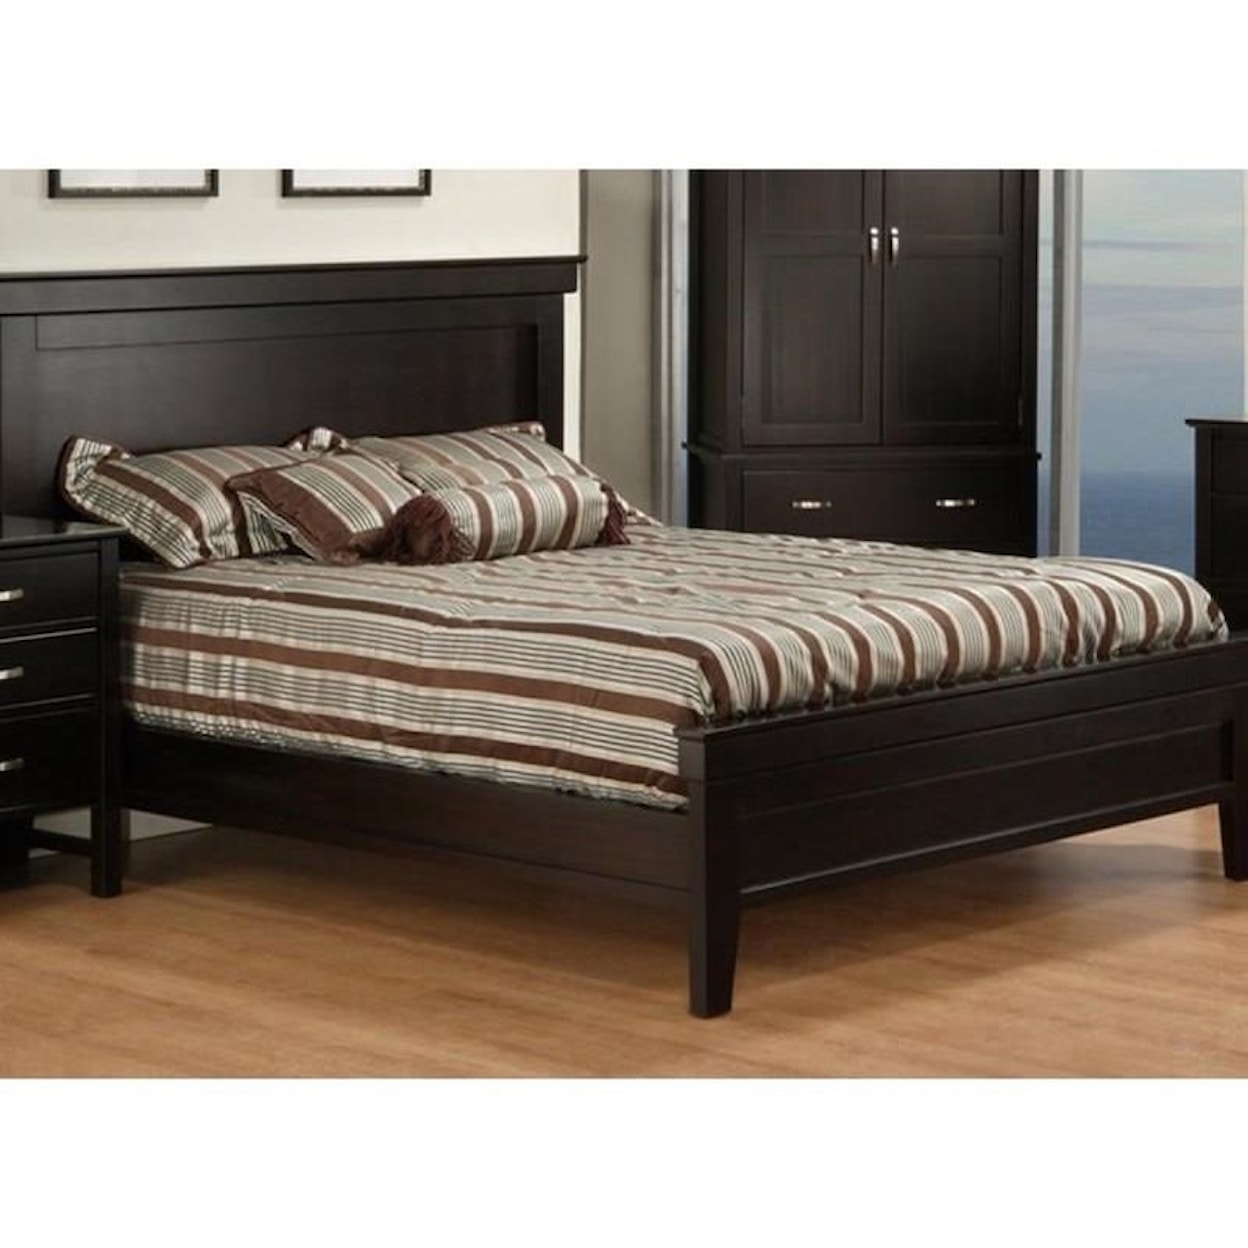 Handstone Brooklyn Twin Bed with Low Footboard